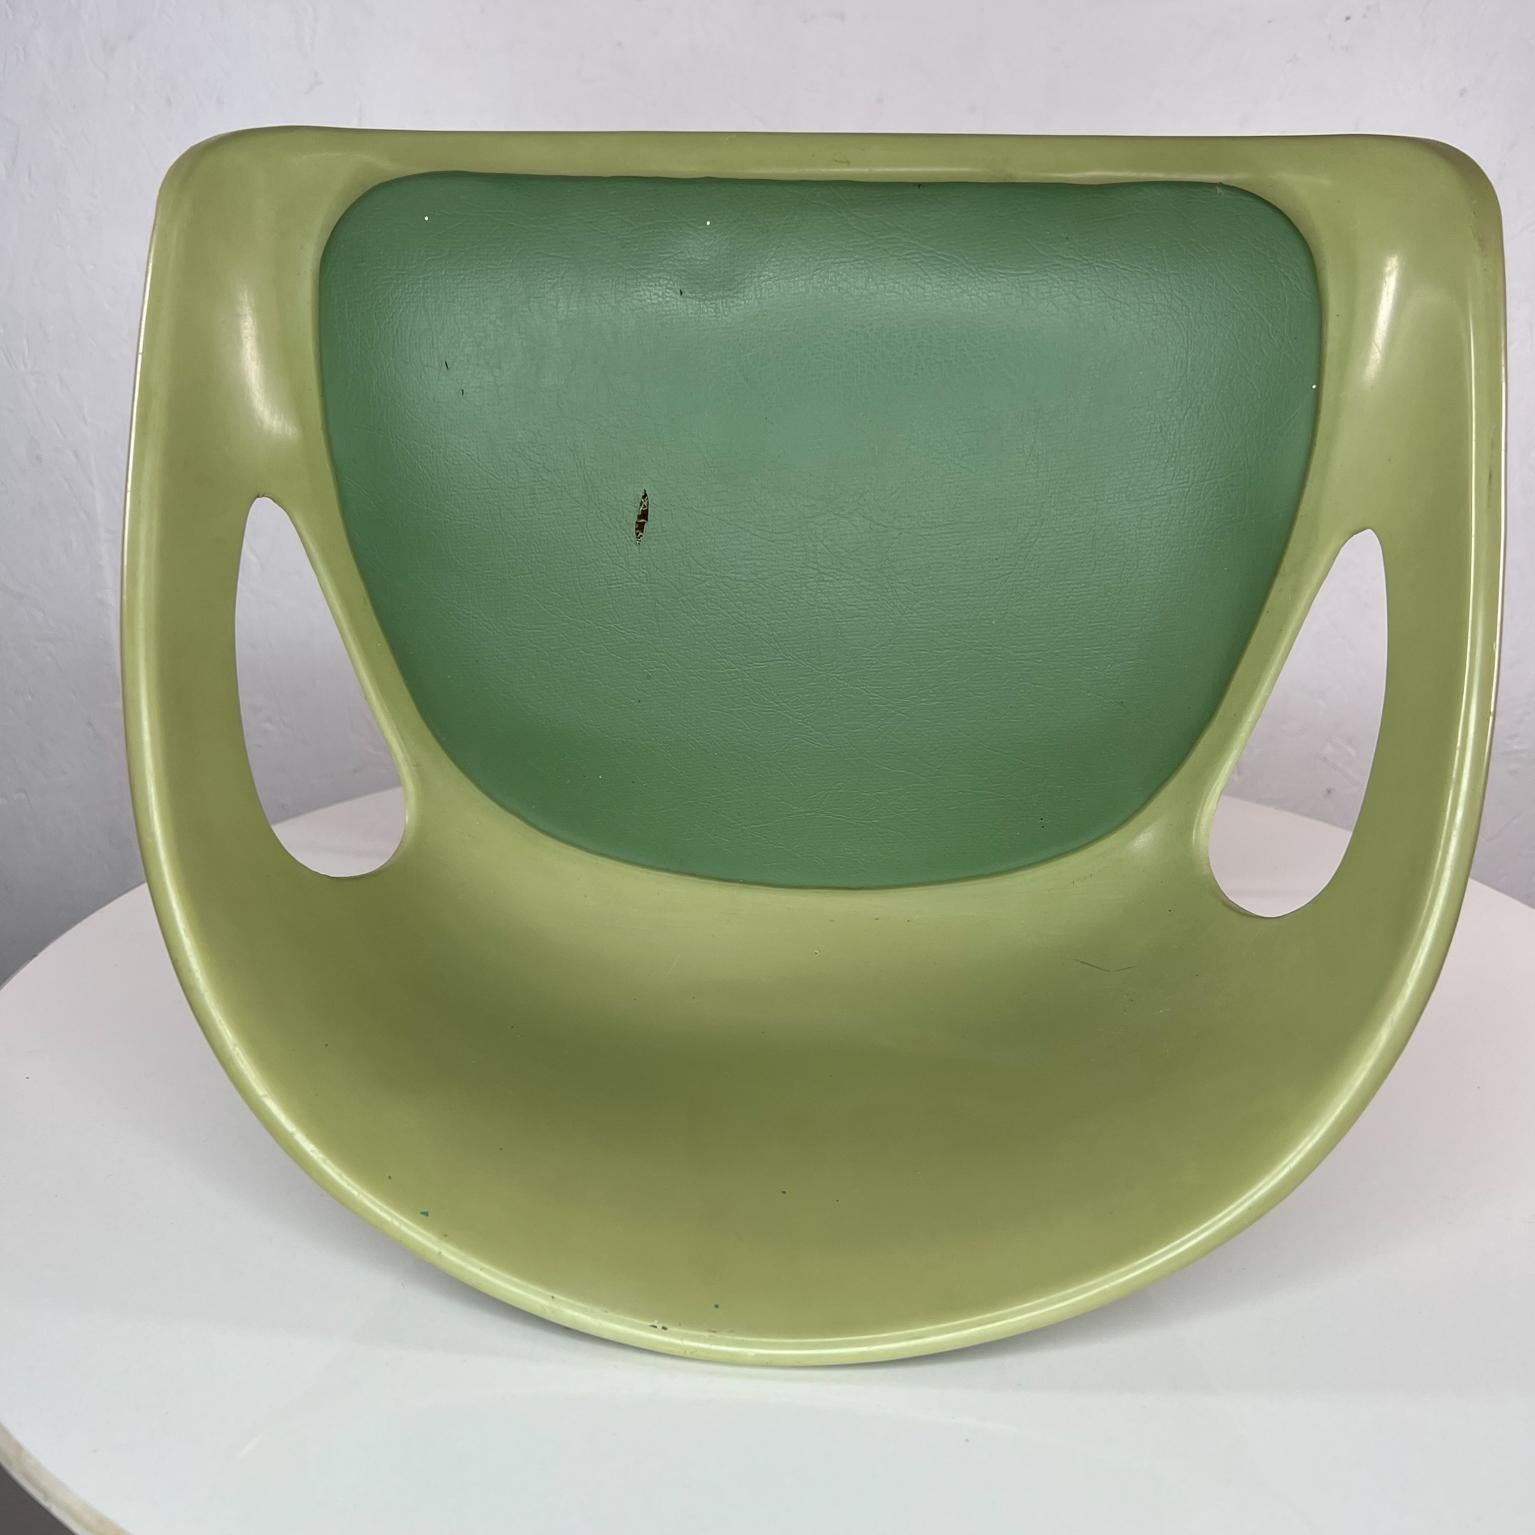 1960s Mid Century Child's Booster Seat Chair Avocado Green by Cosco Indiana 1